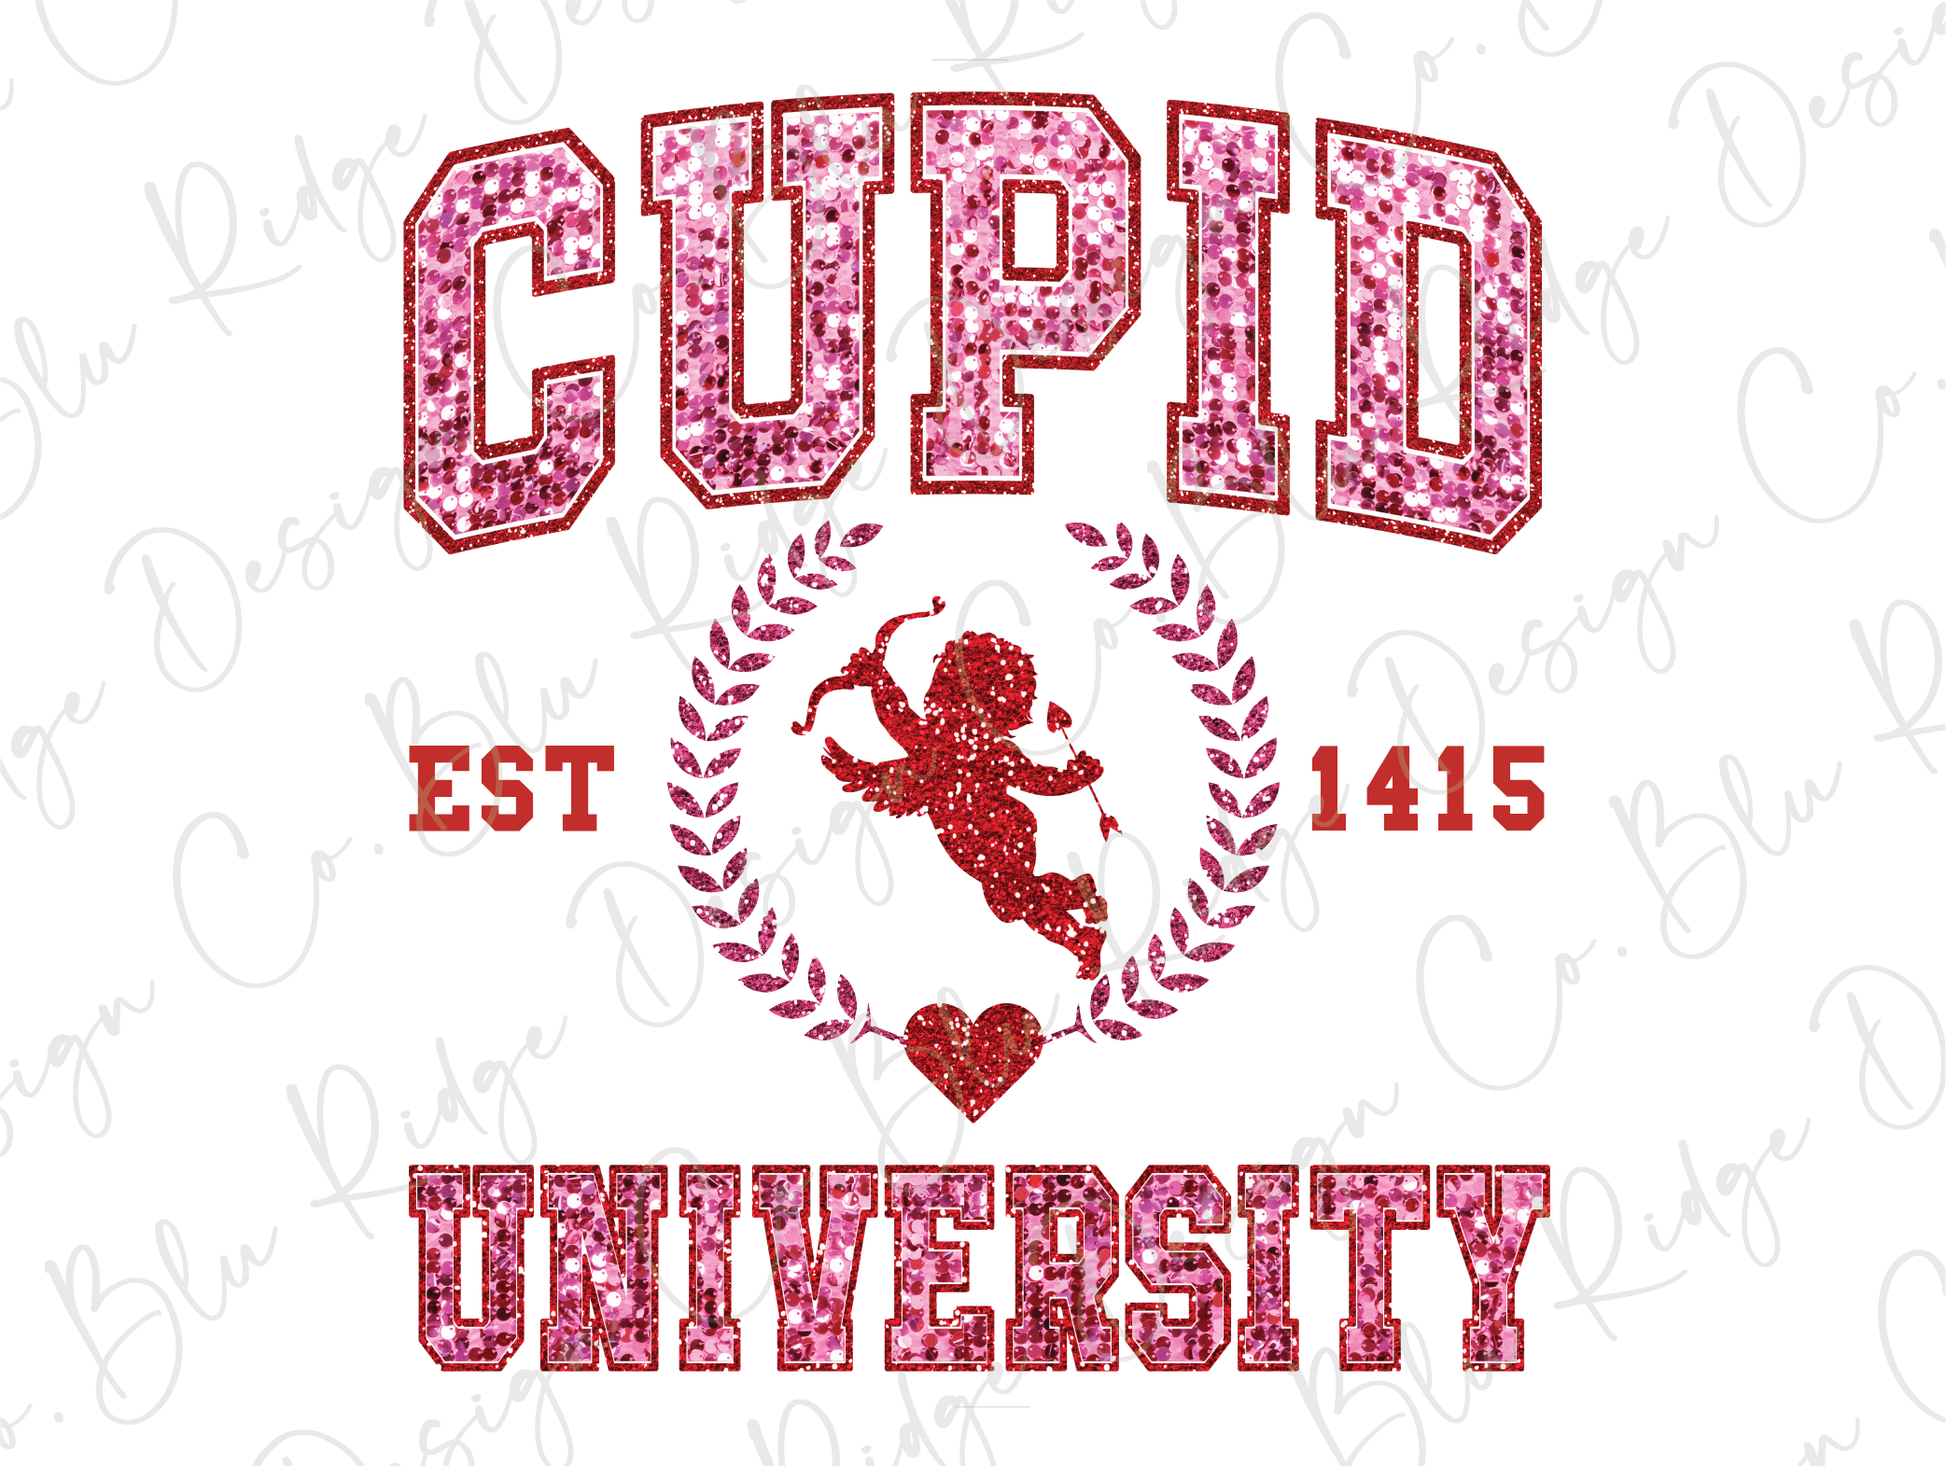 cupid university logo with a cupid cupid on it